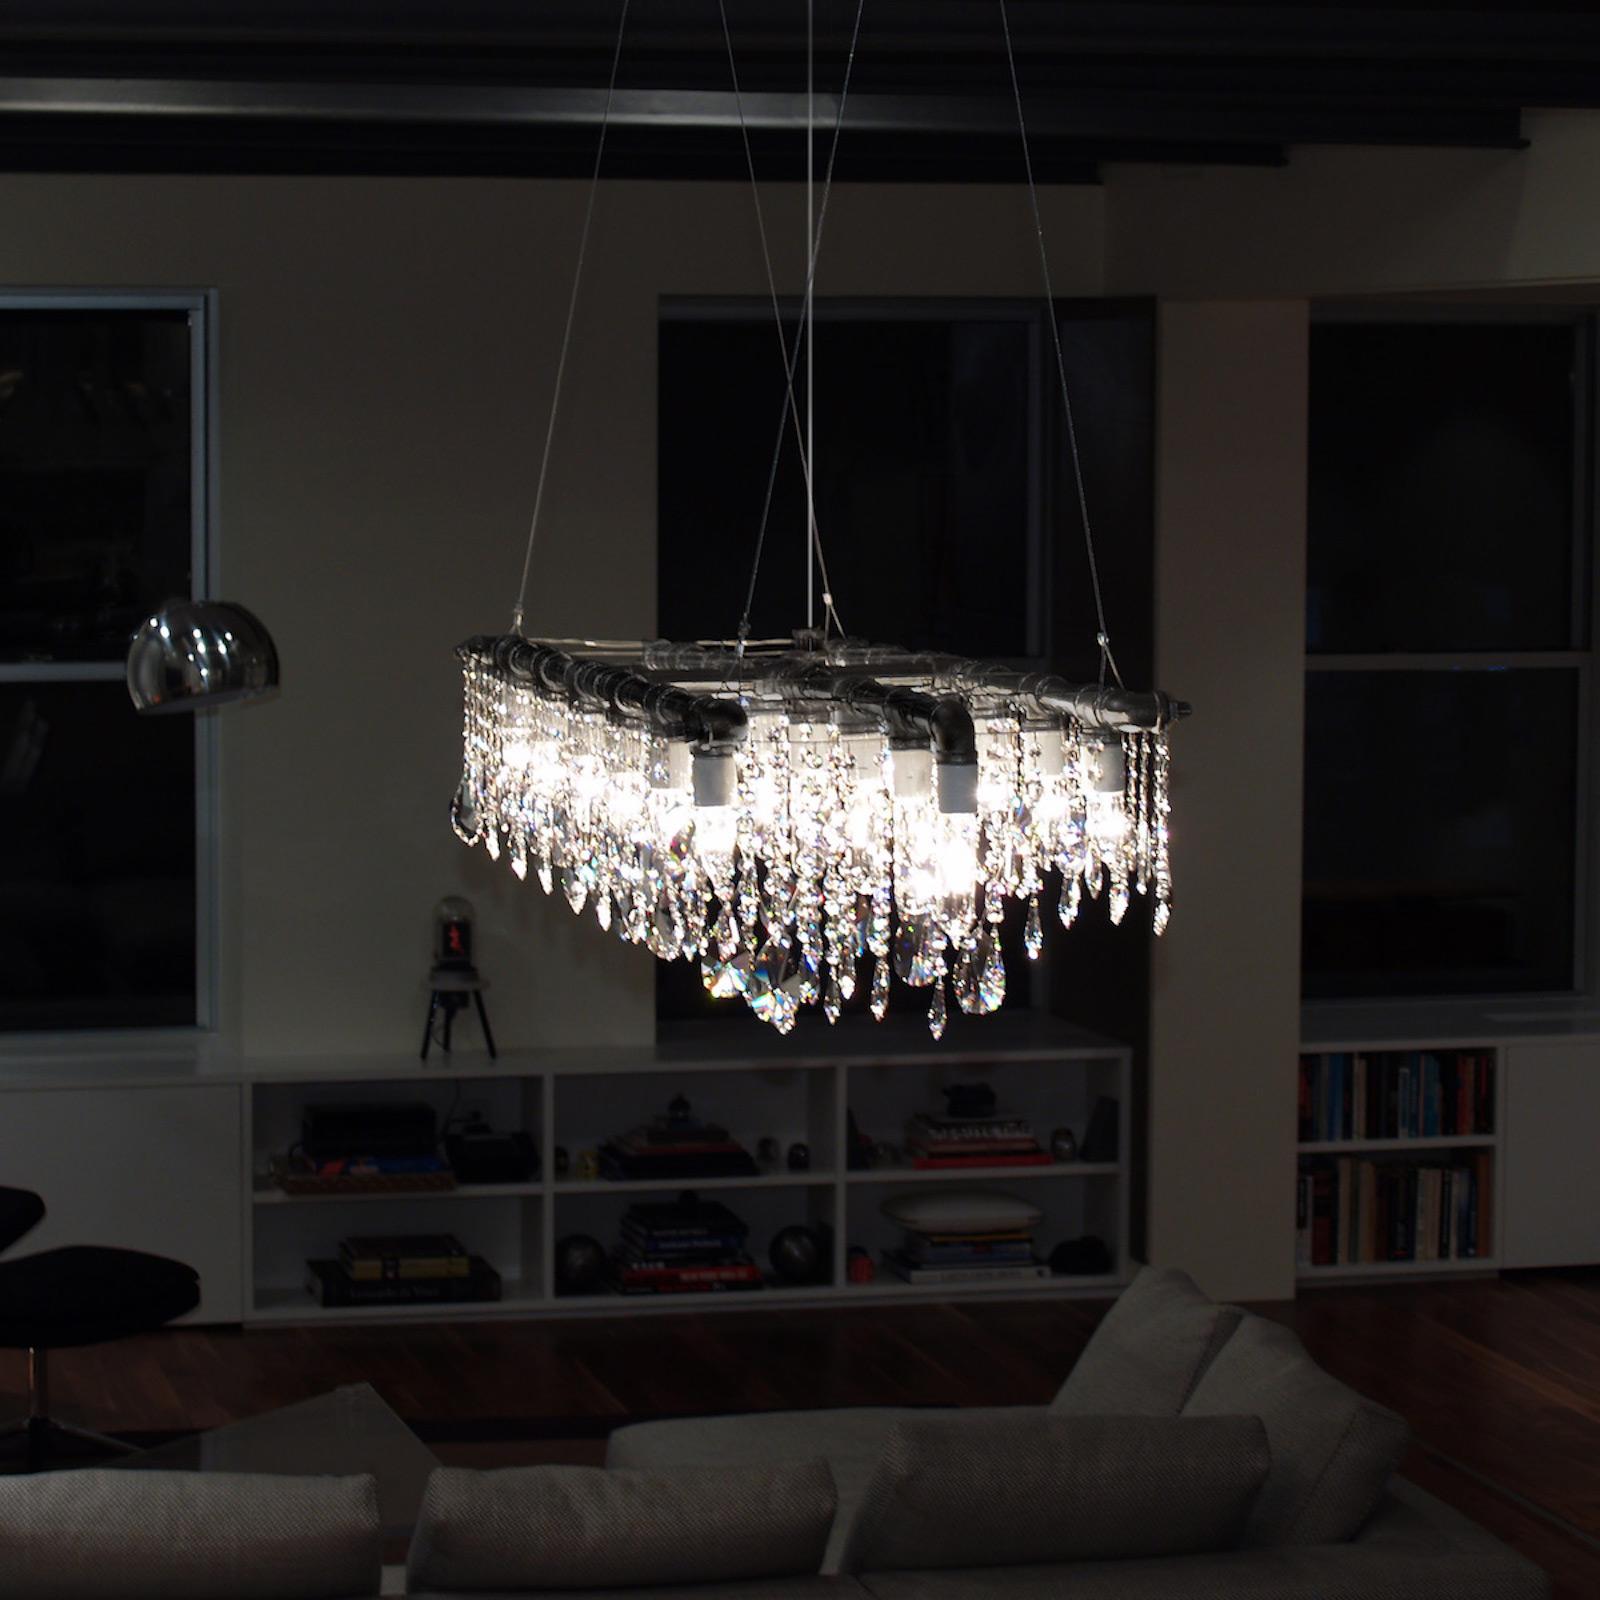 The Industrial Triple Rail Chandelier is undoubtedly one of our most ambitious designs to date. Its design is both simple – with three steel pipe rails and a crossbar – and richly complex, with rows of optically-pure crystal alternating with